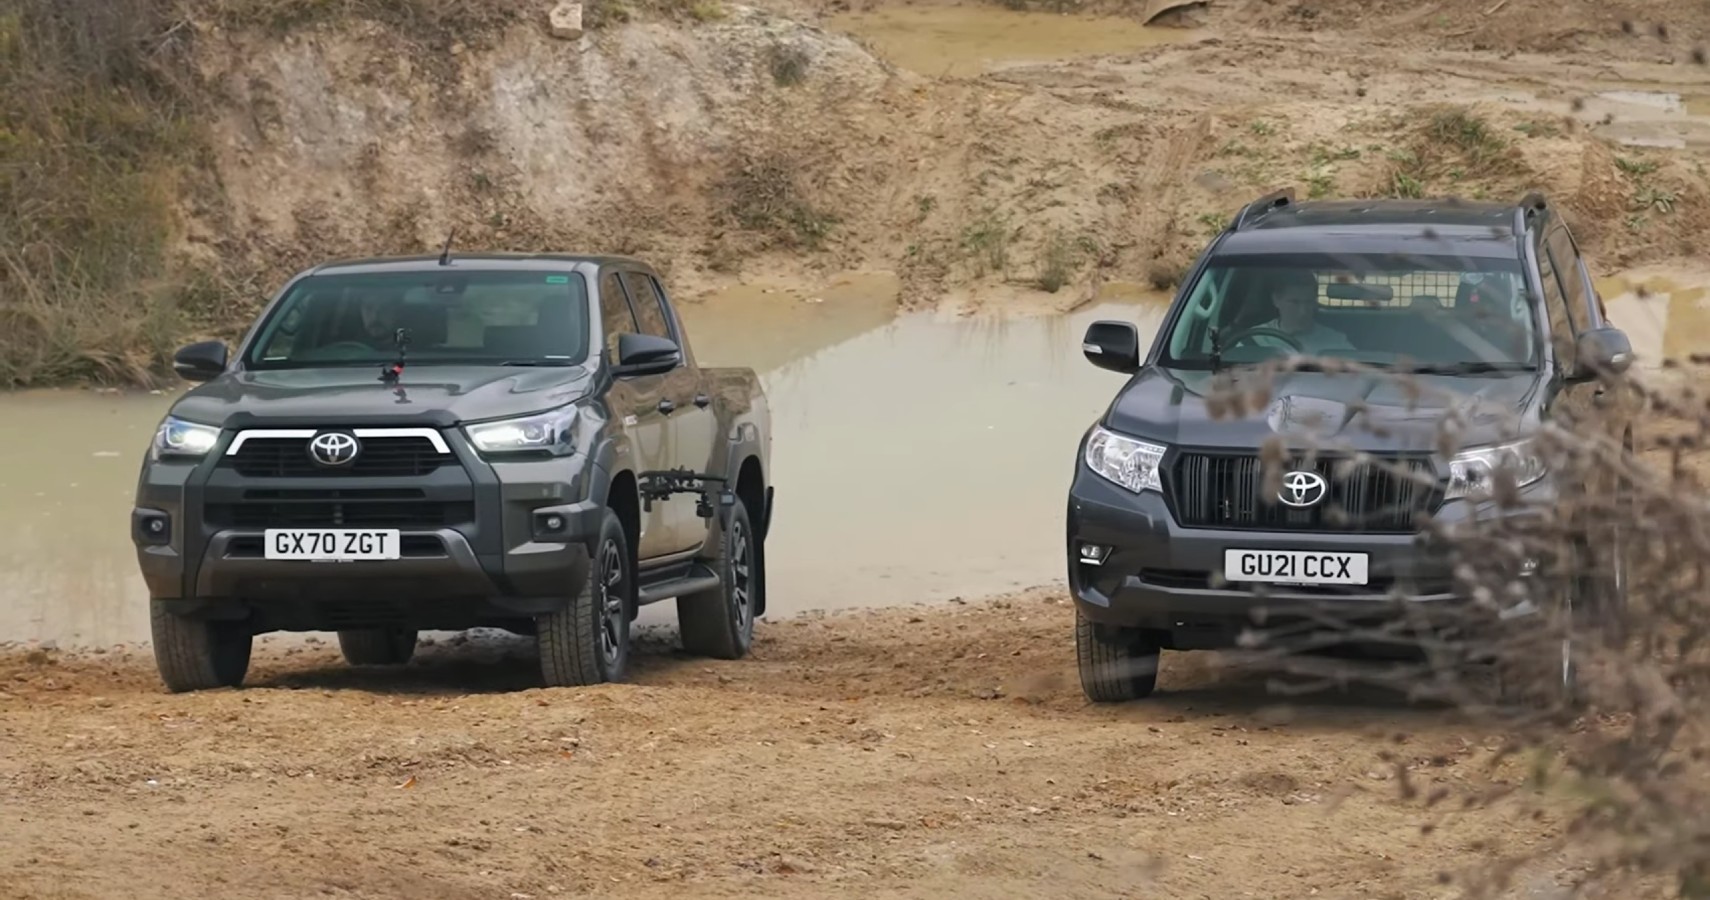 Toyota Hilux Takes On A Land Cruiser In An Uphill Drag Race Gets